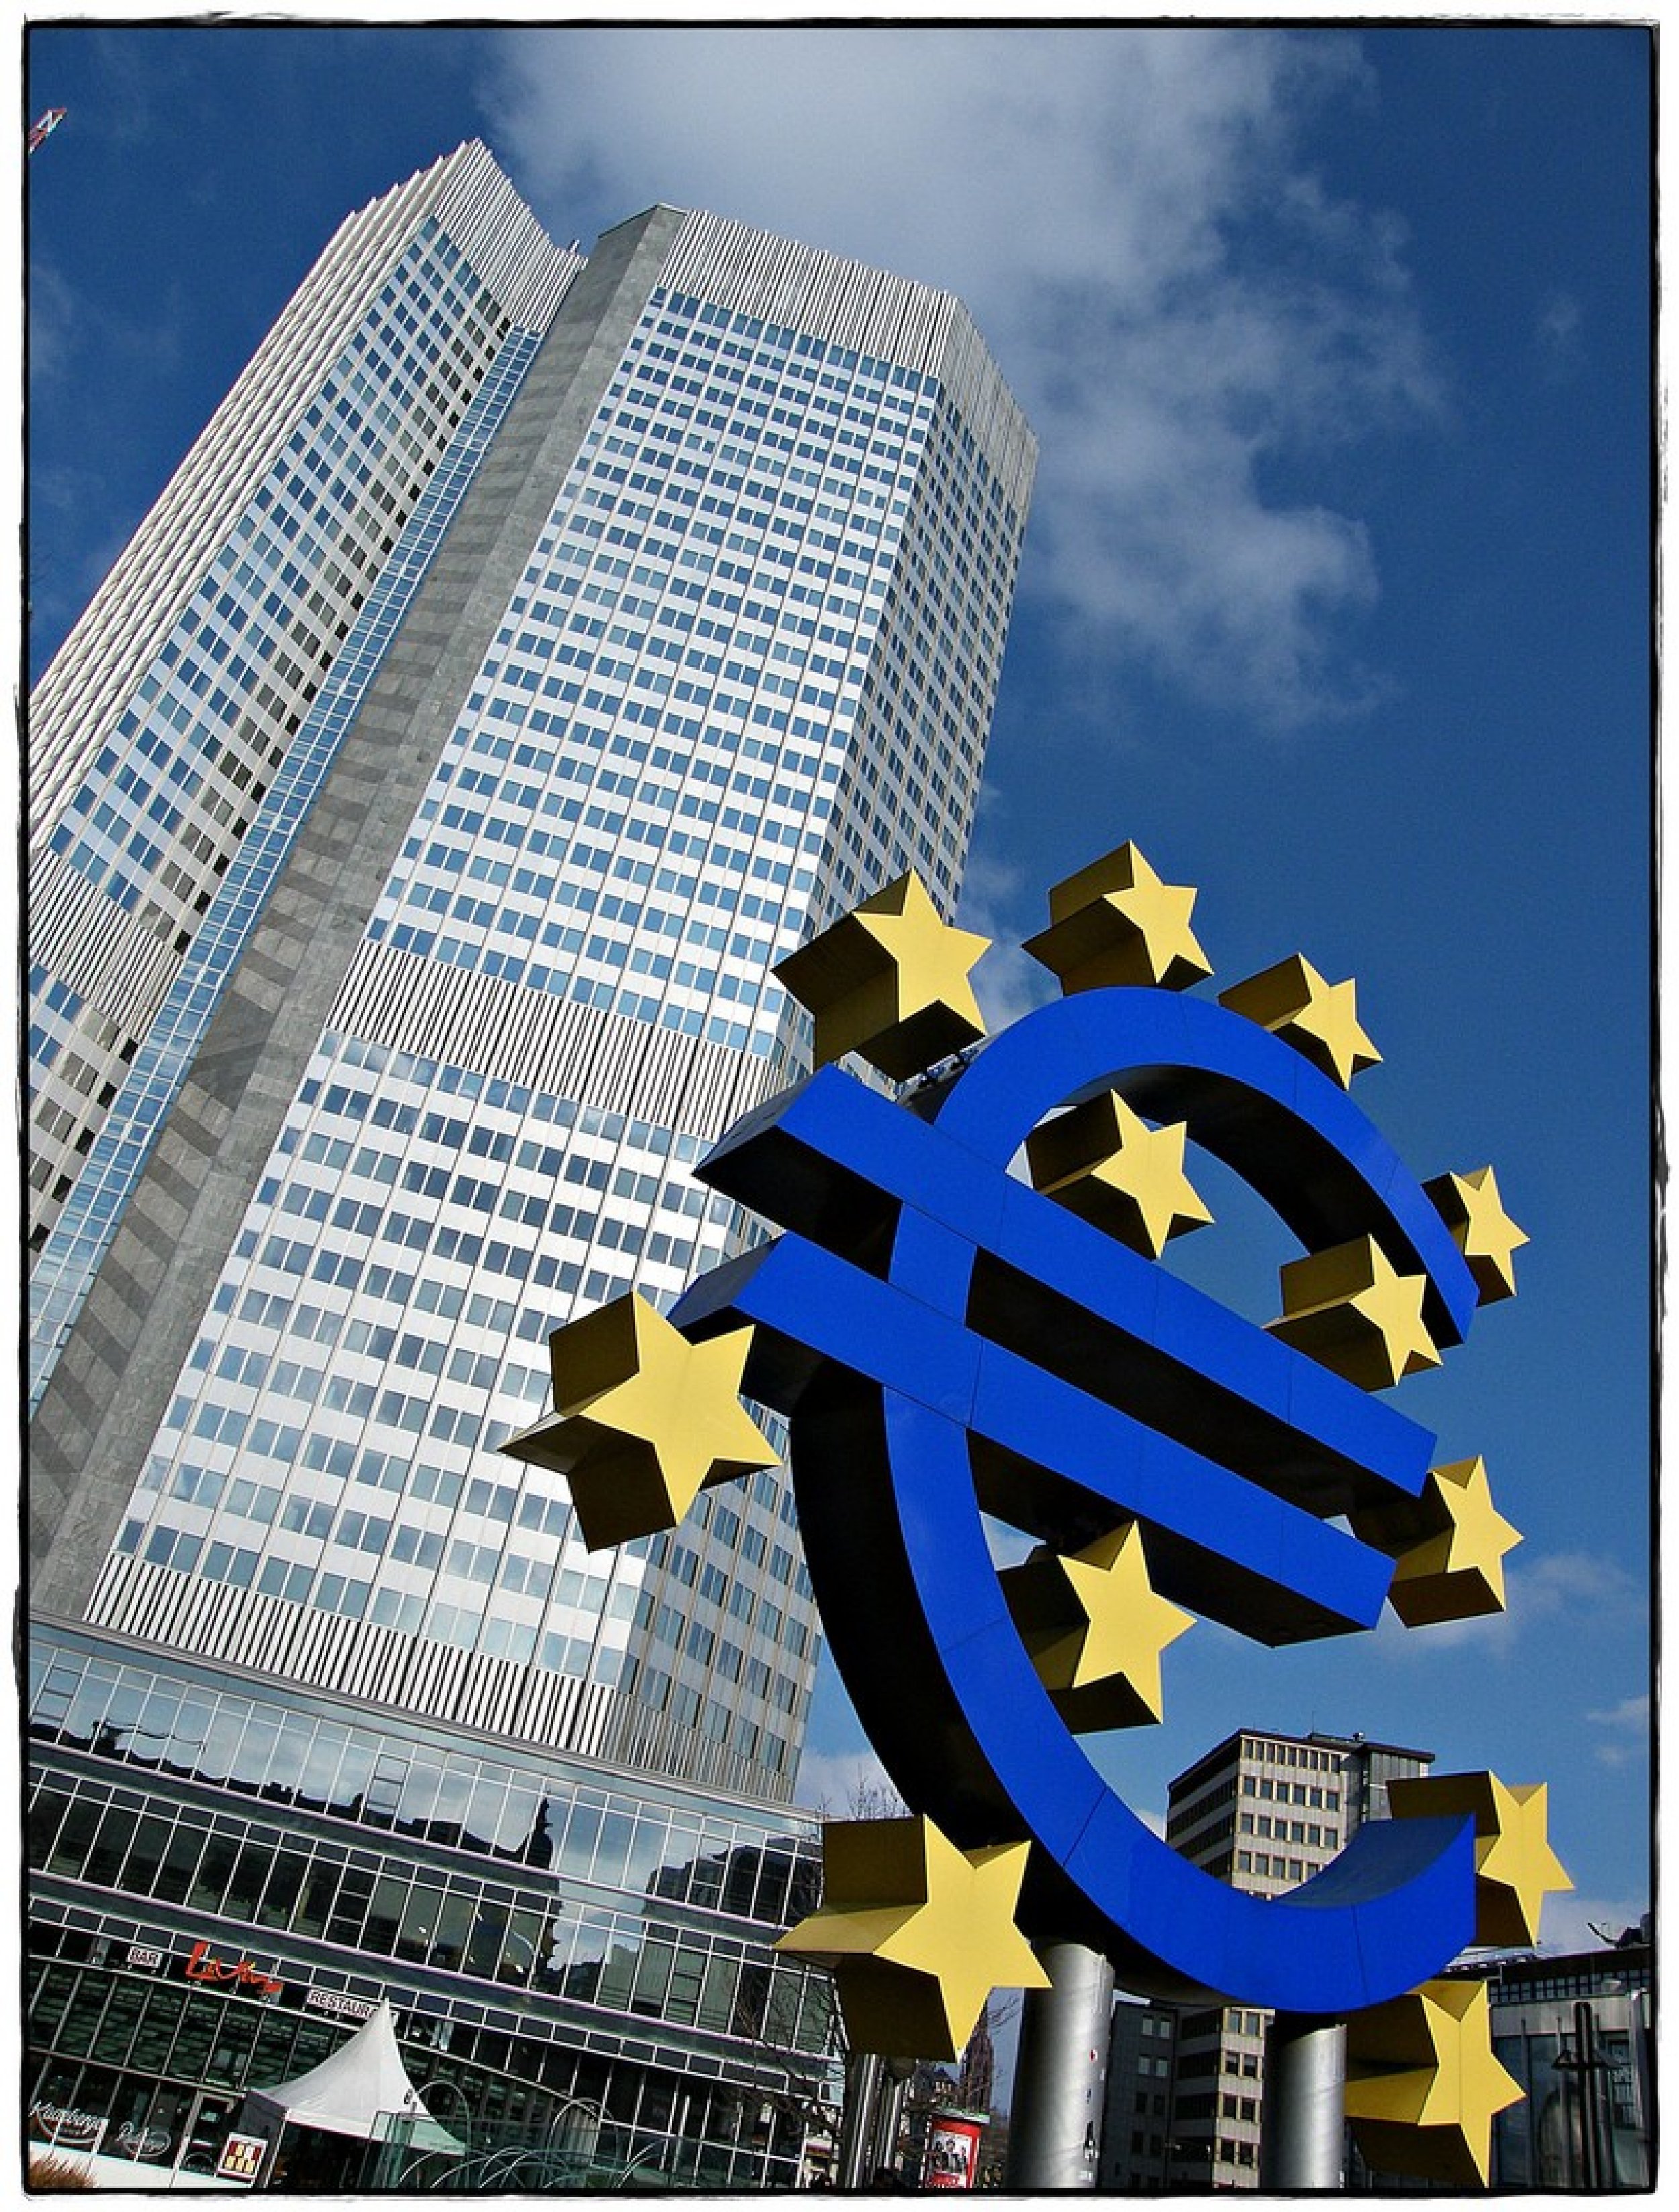 The European Central Bank sits in Frankfurt, Germany